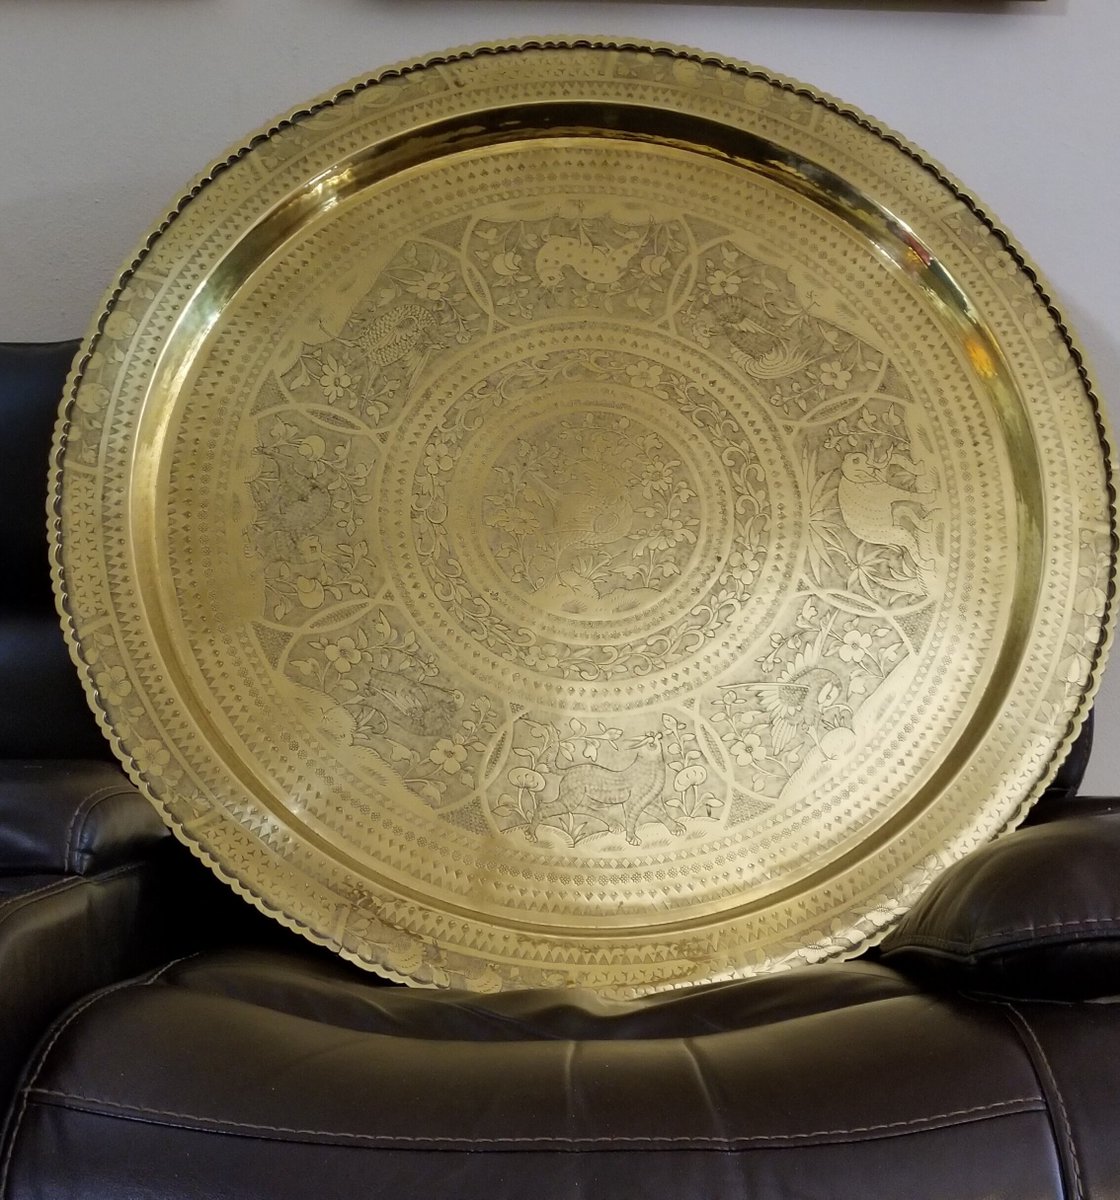 13.5lbs Hand Hammered Museum Quality Solid Brass Wall Hanging Tray 36' dia. 2.5 Depth 1960 sic. Stamped 'Made in Hong Kong' Animal Theme
JoesJemsCreations.com
#JoesJemsCreations
#Brass #metalworking #HomeDecor #MidCentury #WallHanging #SolidBrass #13pounds #AnimalTheme